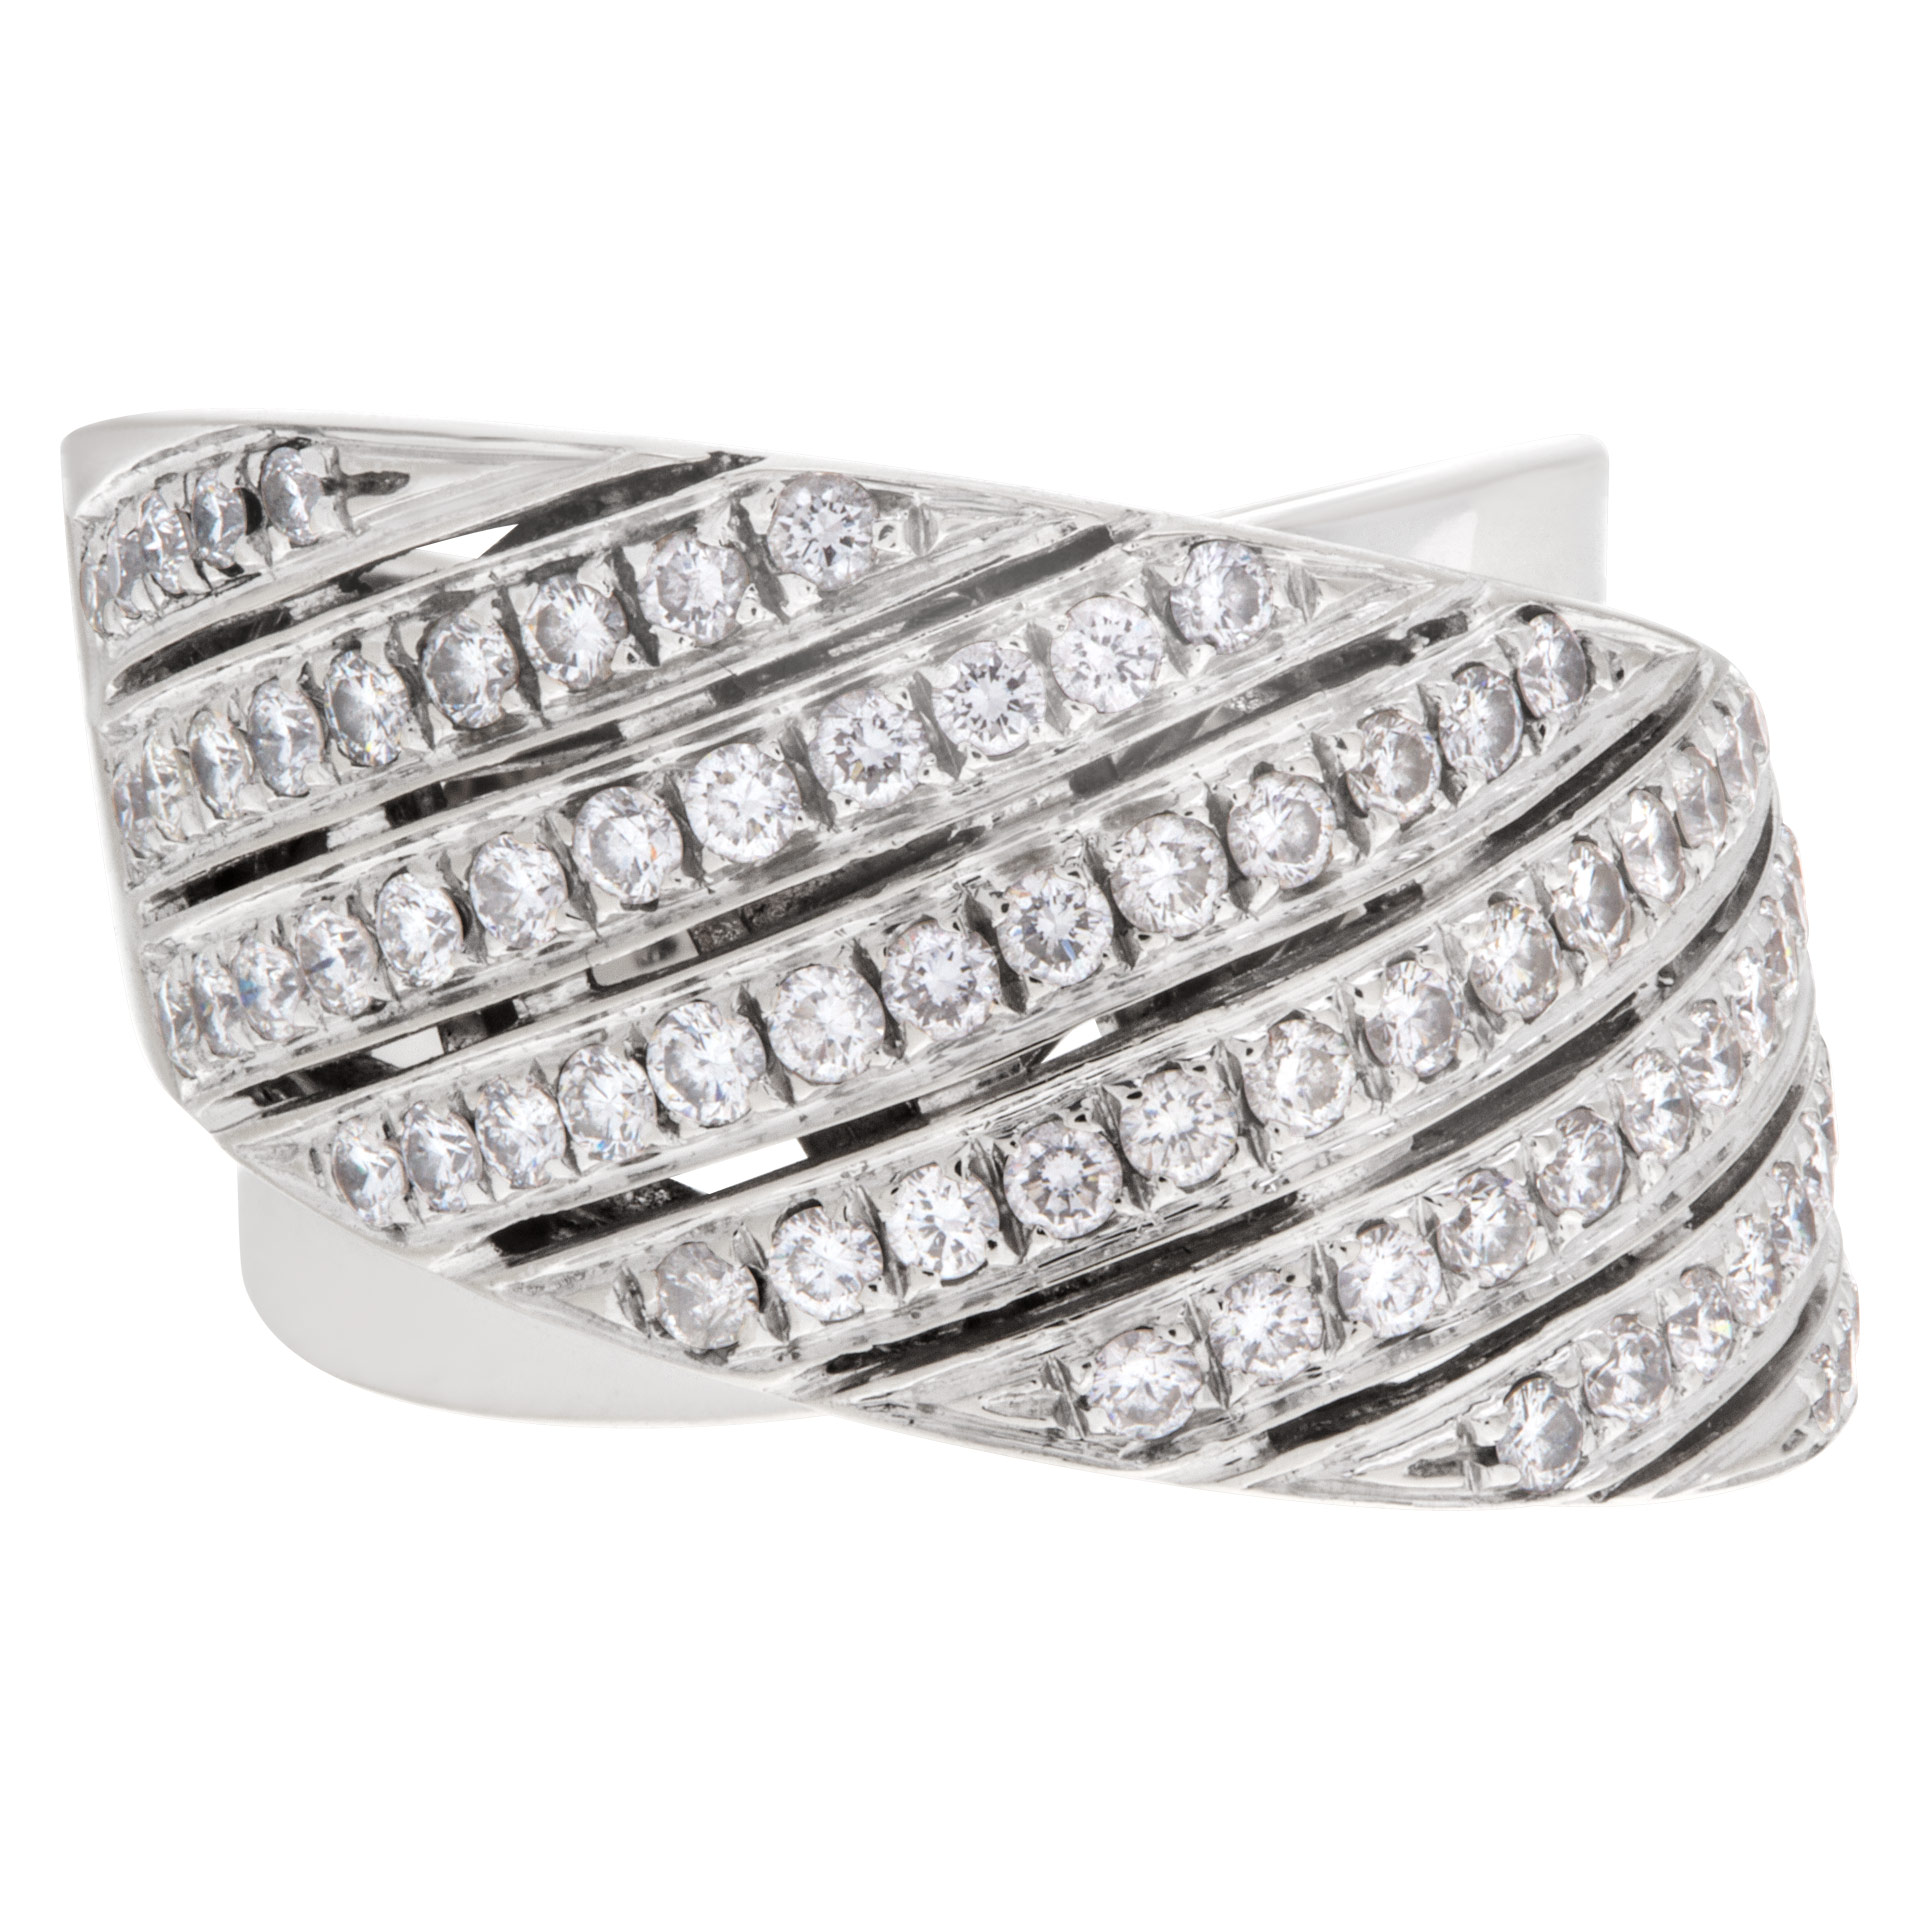 Contemporary design wide "crisscross" ring with 1.50 carat pave diamonds set in 18K white gold. image 1